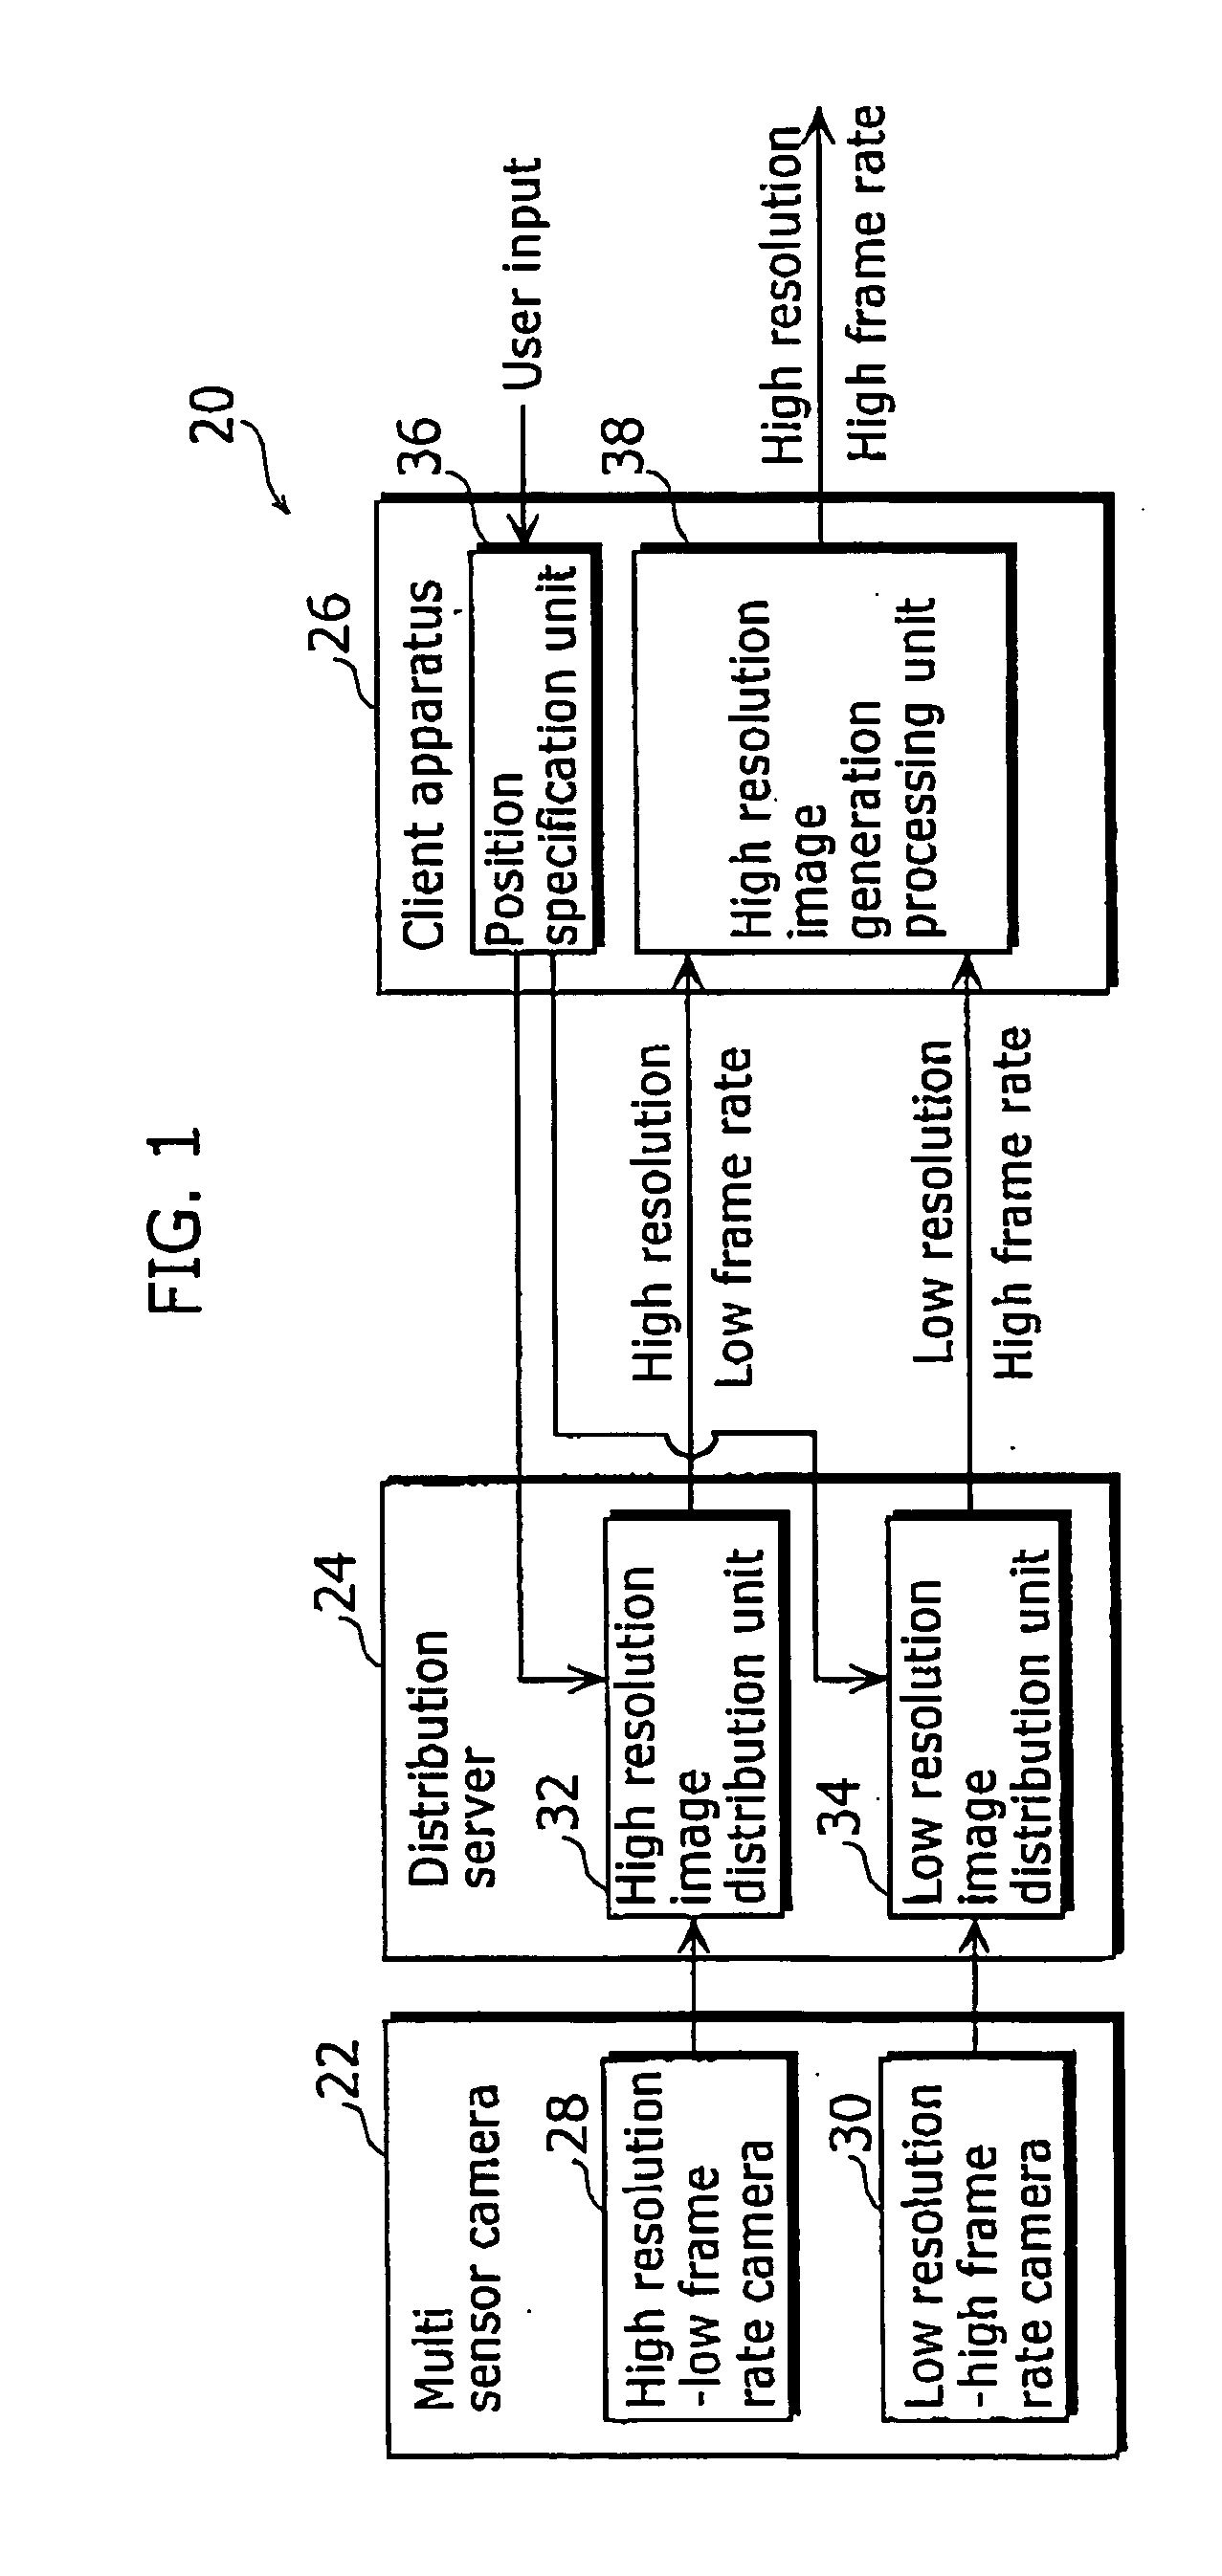 Imaging system, image data stream creation apparatus, image generation apparatus, image data stream generation apparatus, and image data stream generation system